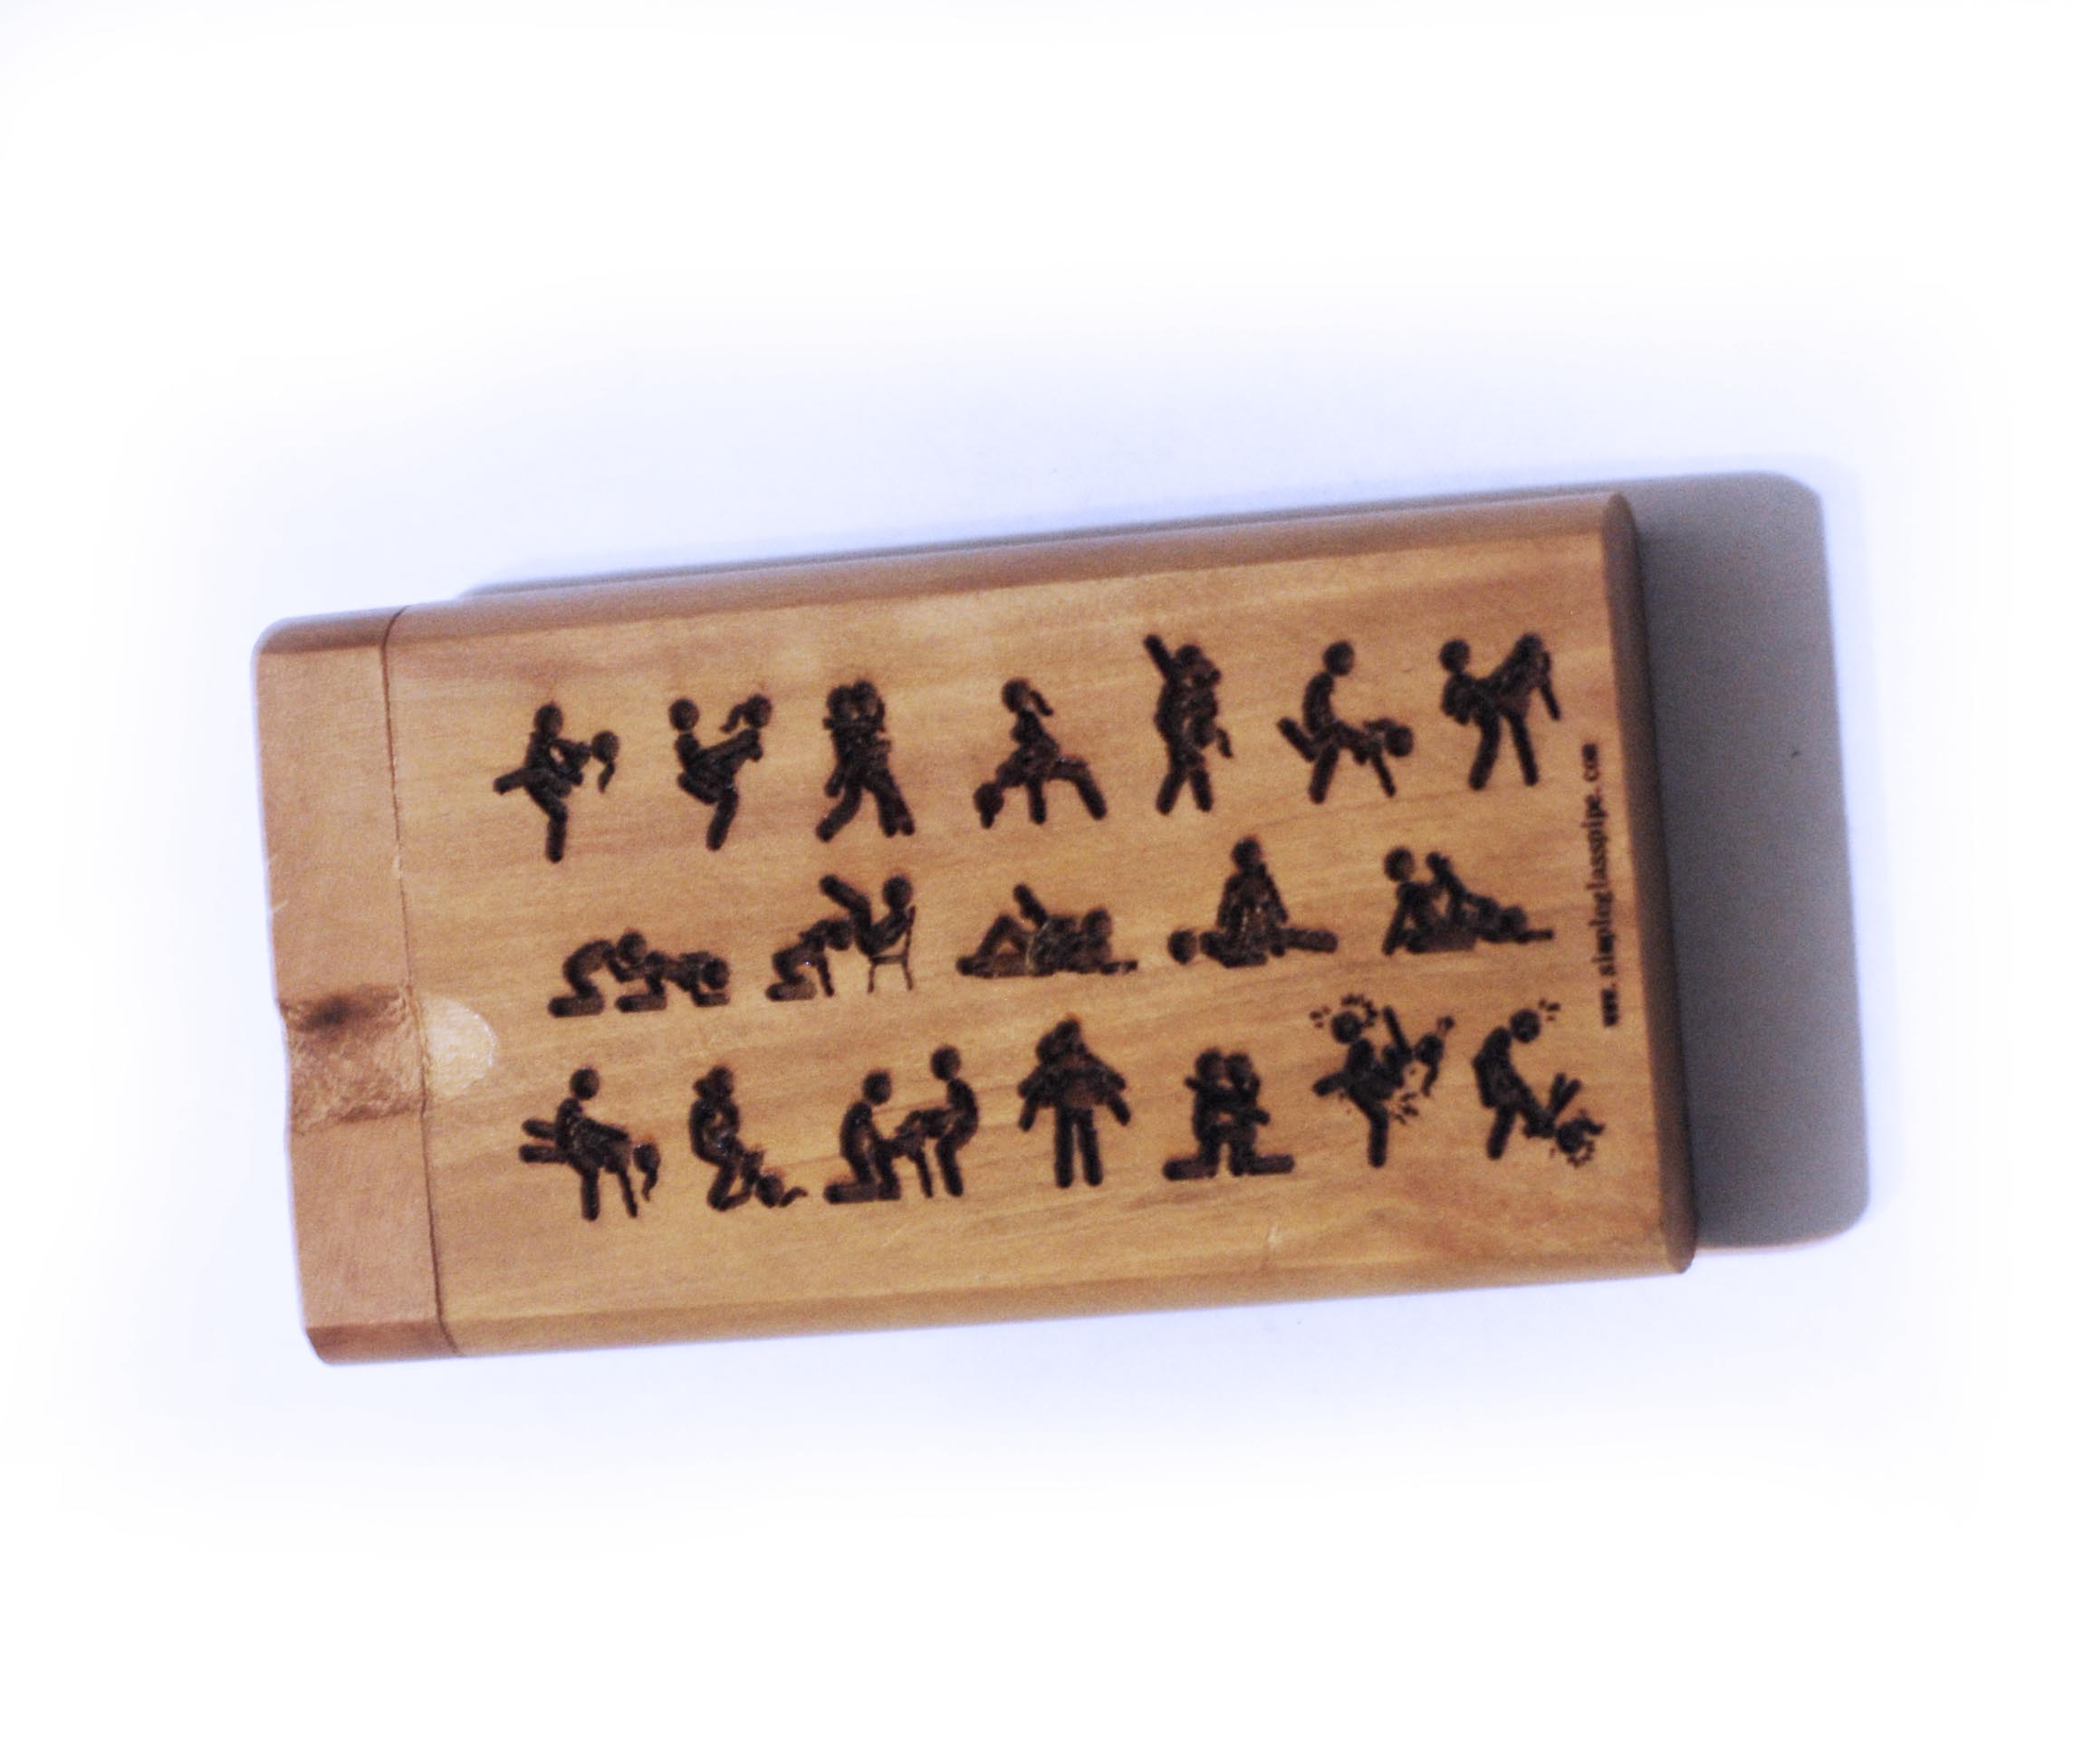 19 Sex Positions wood dogout pipe with bat